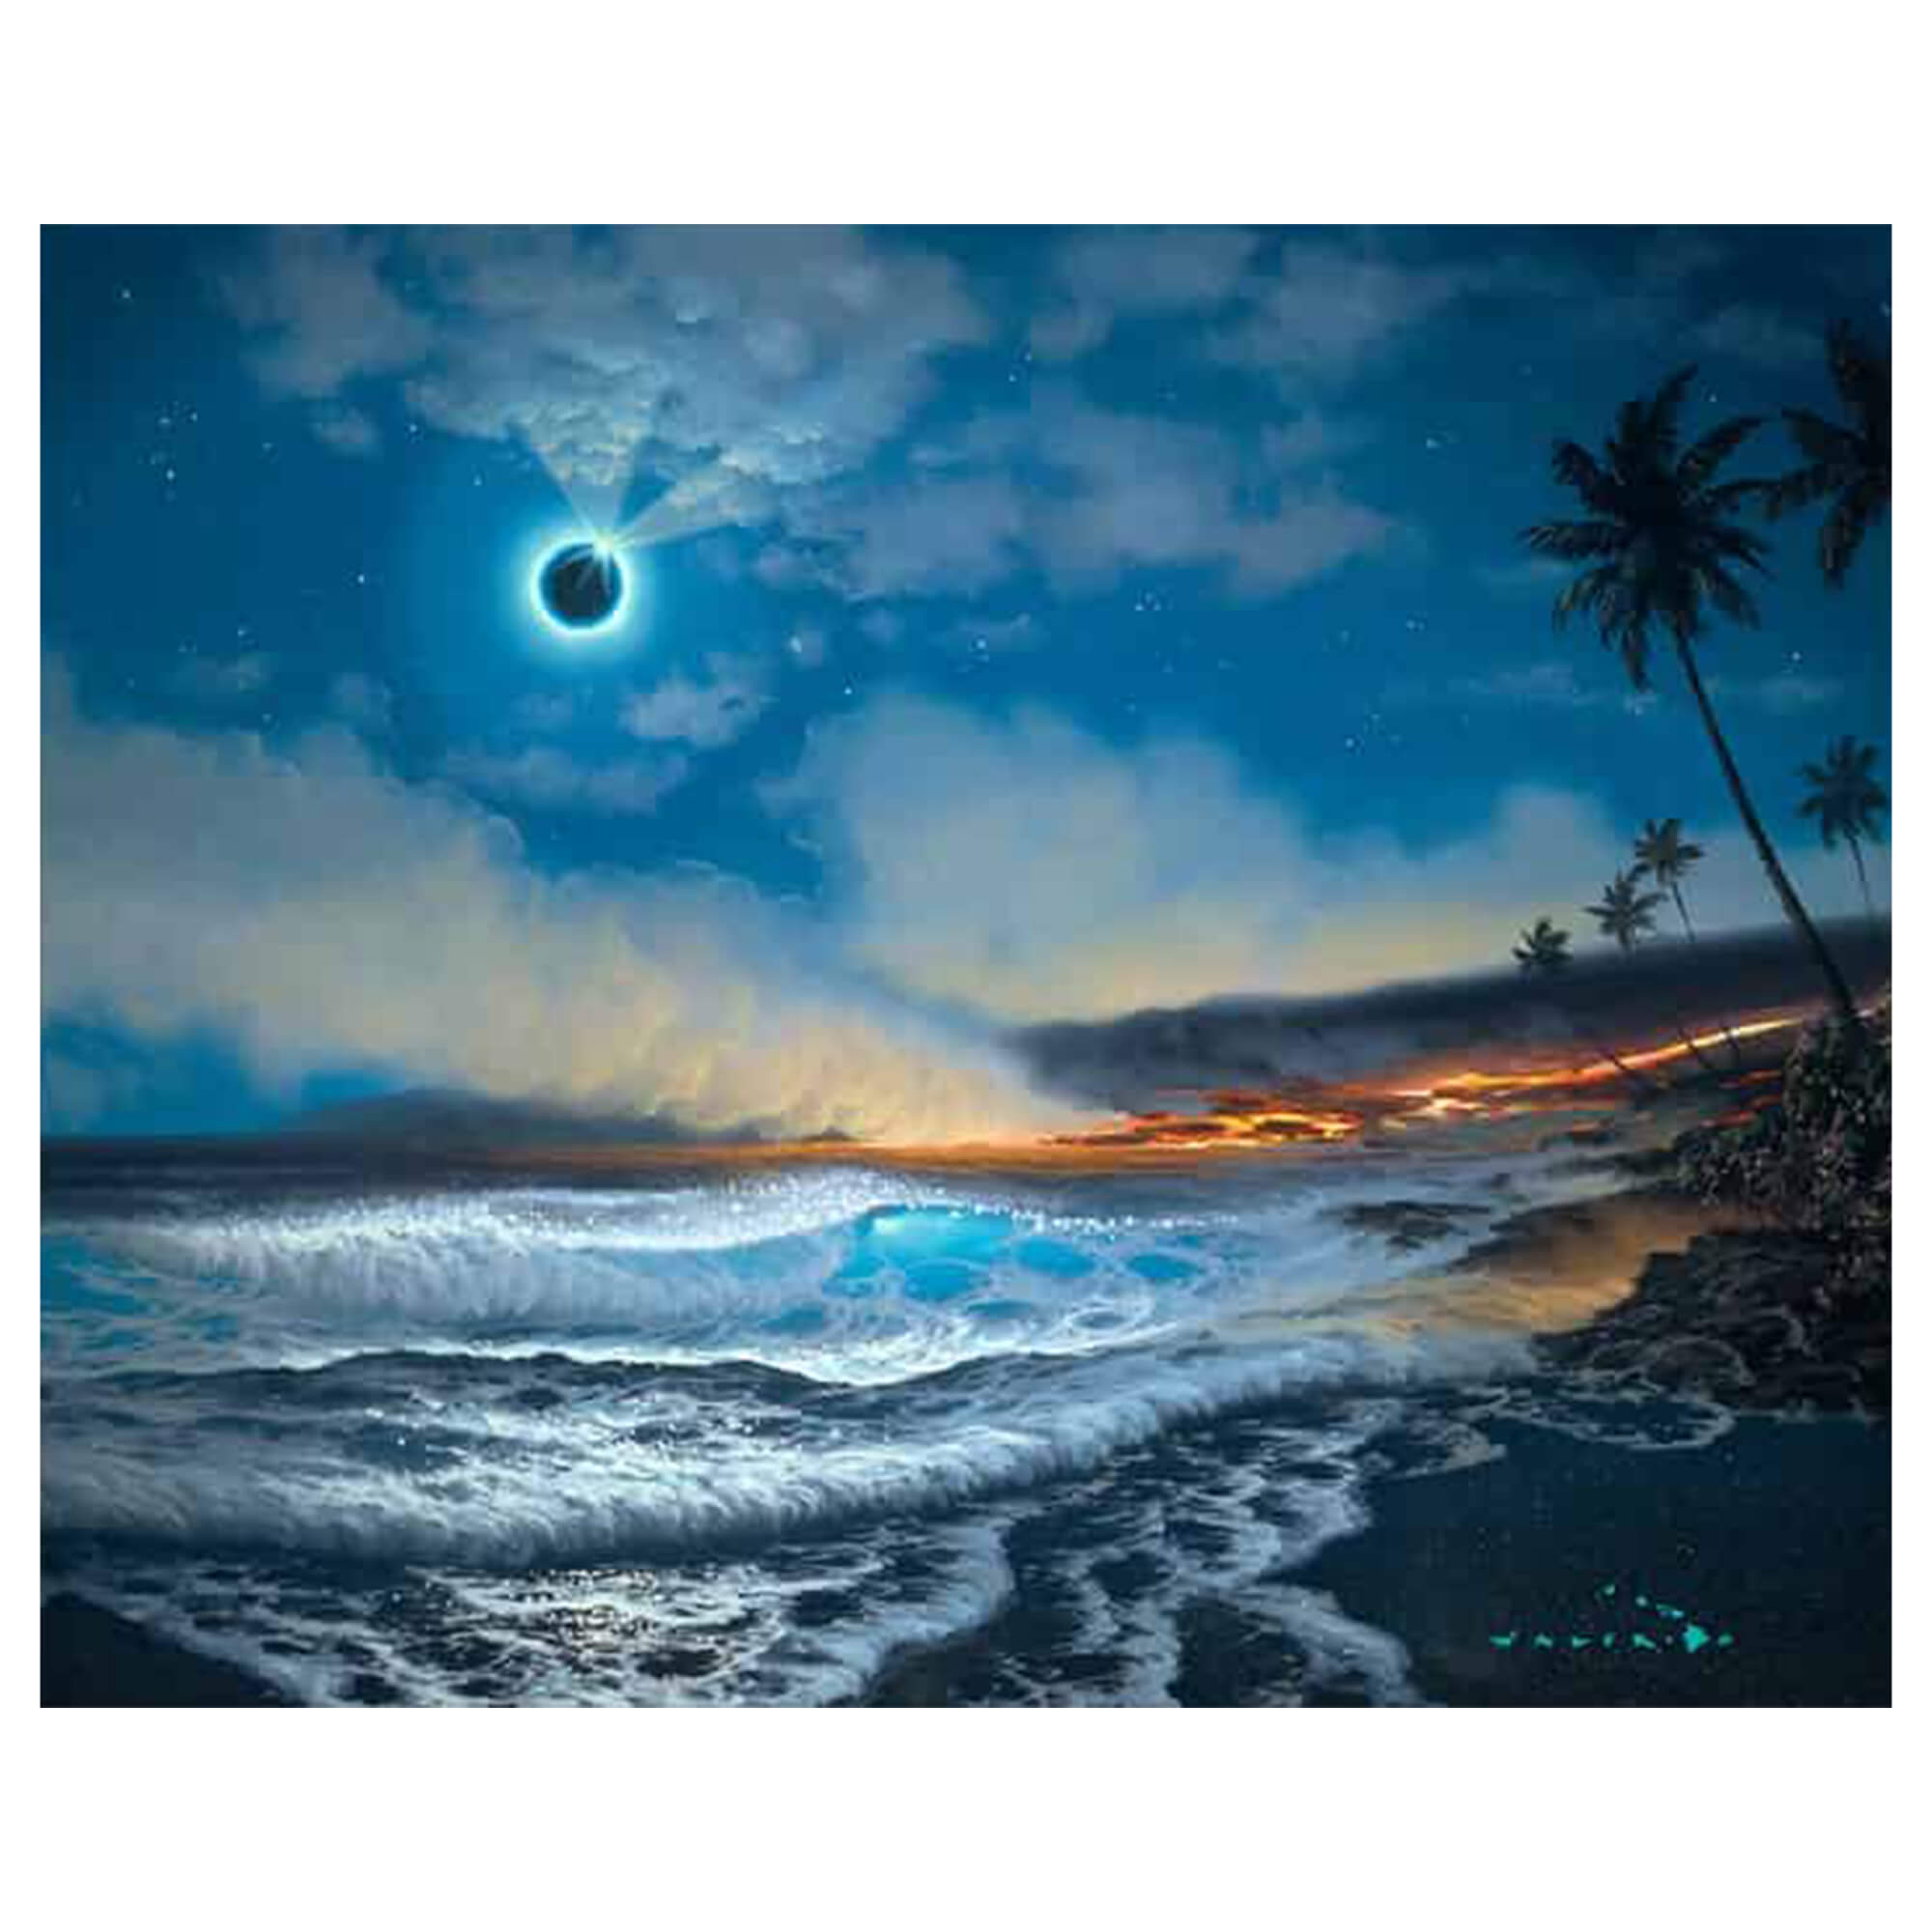 A matted art print of a lunar eclipse and lava from a volcano flowing into the sea causing steam to rise up into the night air by Hawaii artist Walfrido Garcia